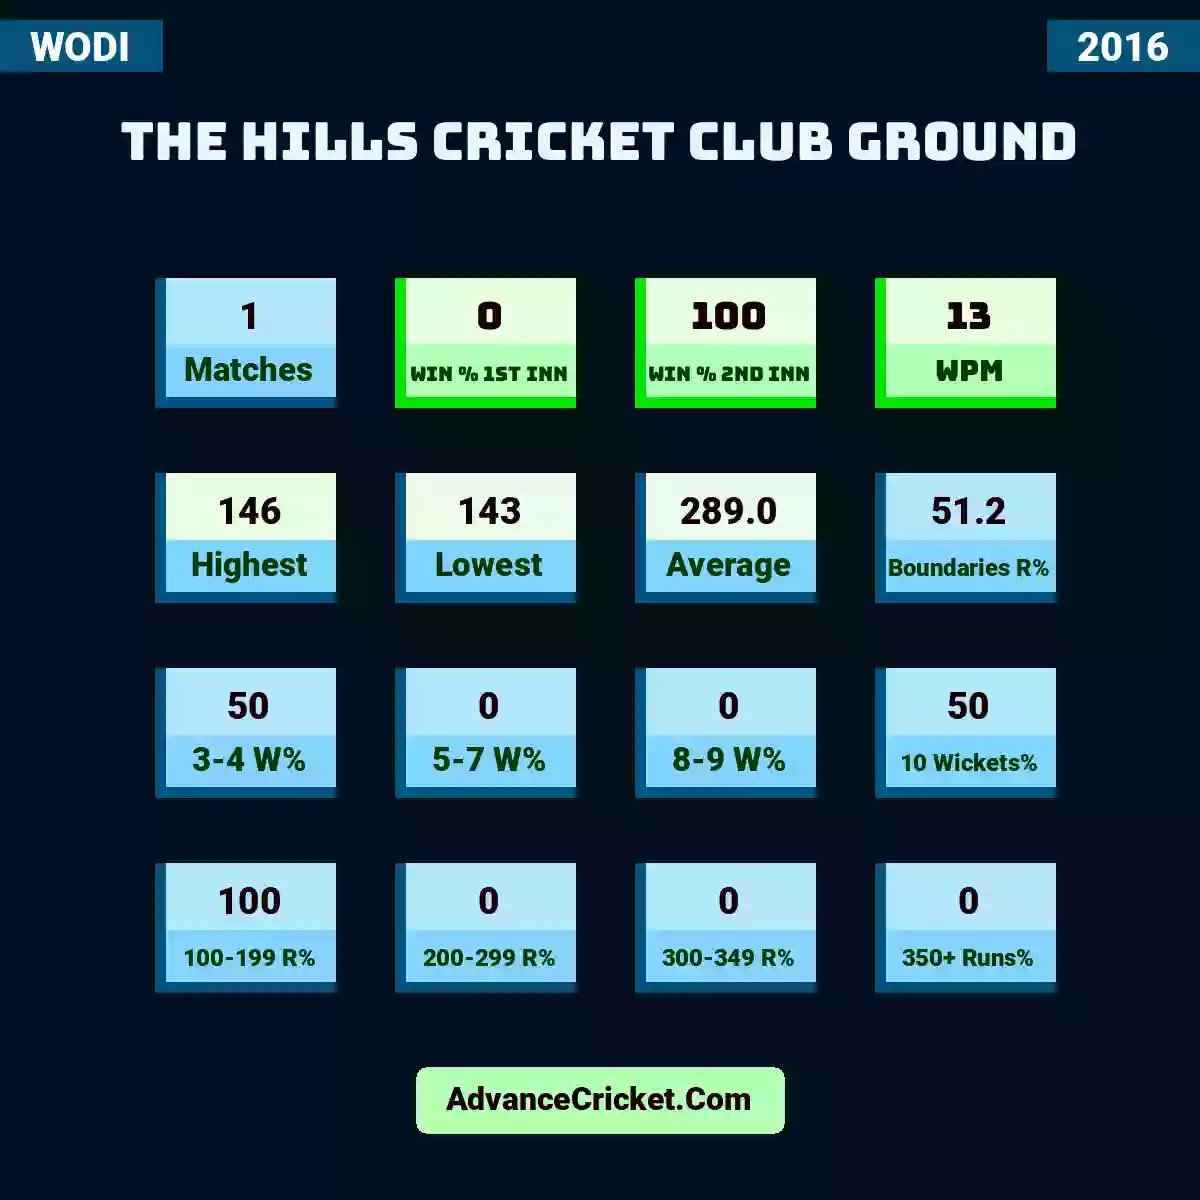 Image showing The Hills Cricket Club Ground with Matches: 1, Win % 1st Inn: 0, Win % 2nd Inn: 100, WPM: 13, Highest: 146, Lowest: 143, Average: 289.0, Boundaries R%: 51.2, 3-4 W%: 50, 5-7 W%: 0, 8-9 W%: 0, 10 Wickets%: 50, 100-199 R%: 100, 200-299 R%: 0, 300-349 R%: 0, 350+ Runs%: 0.